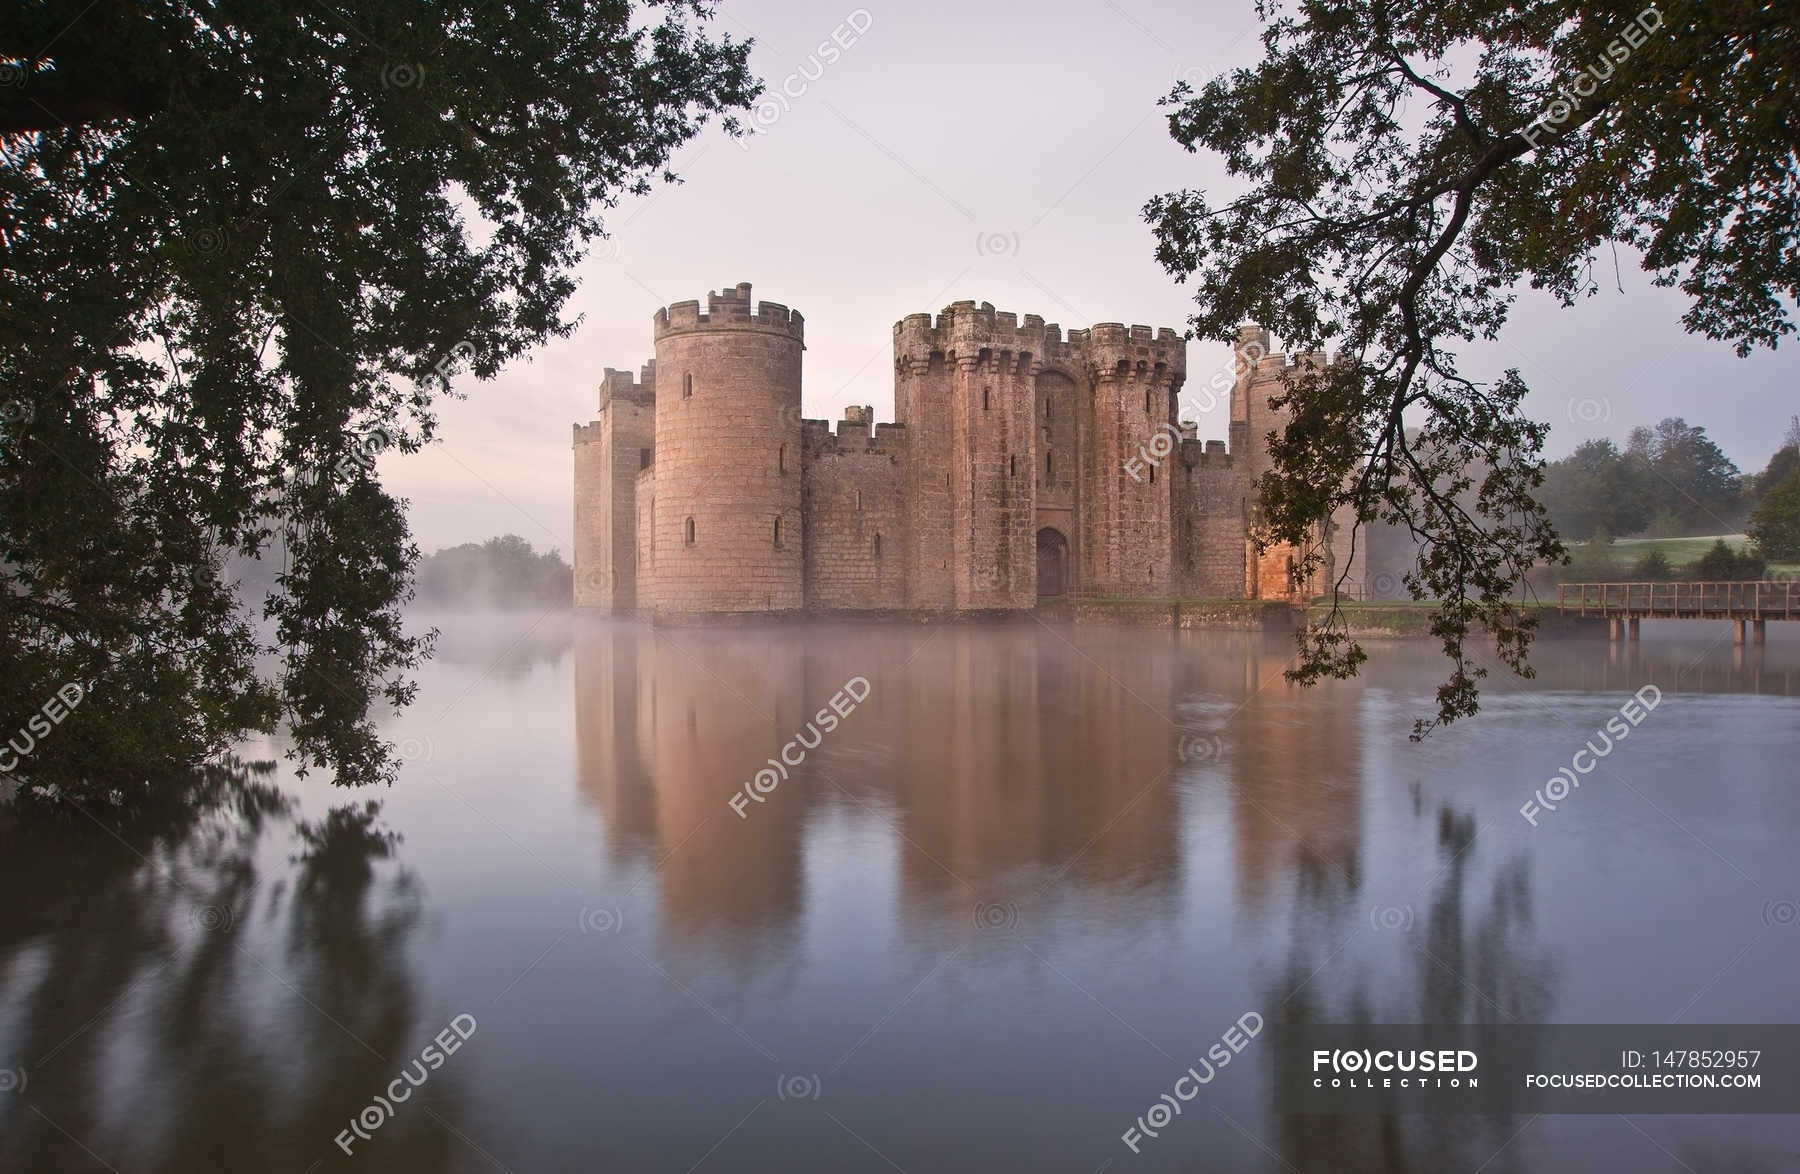 Beautiful medieval castle and moat at sunrise — stone, tower - Stock